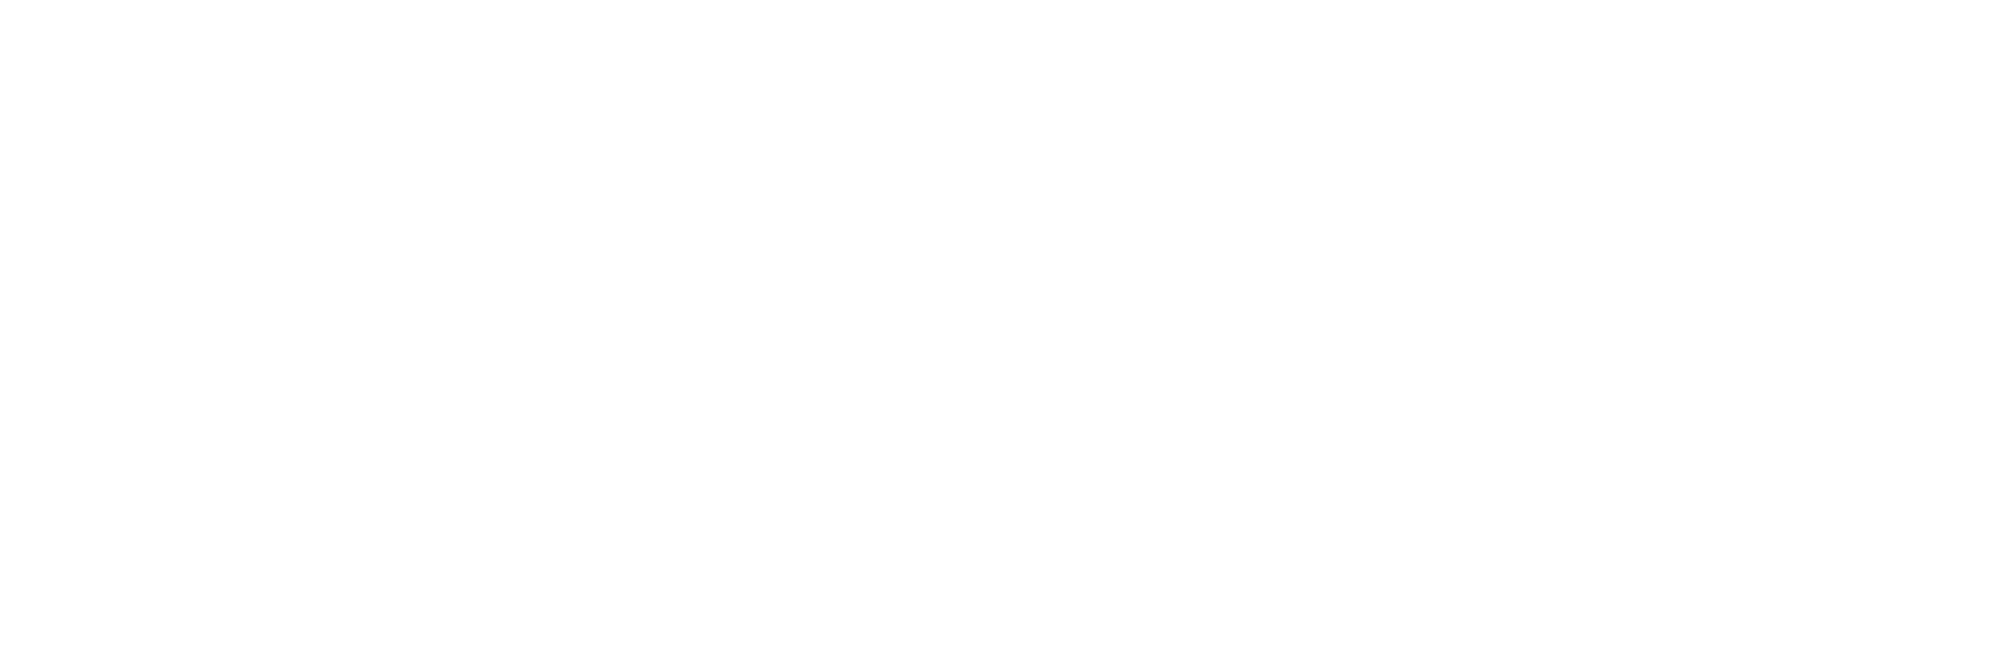 Continental Catering Logo weiss